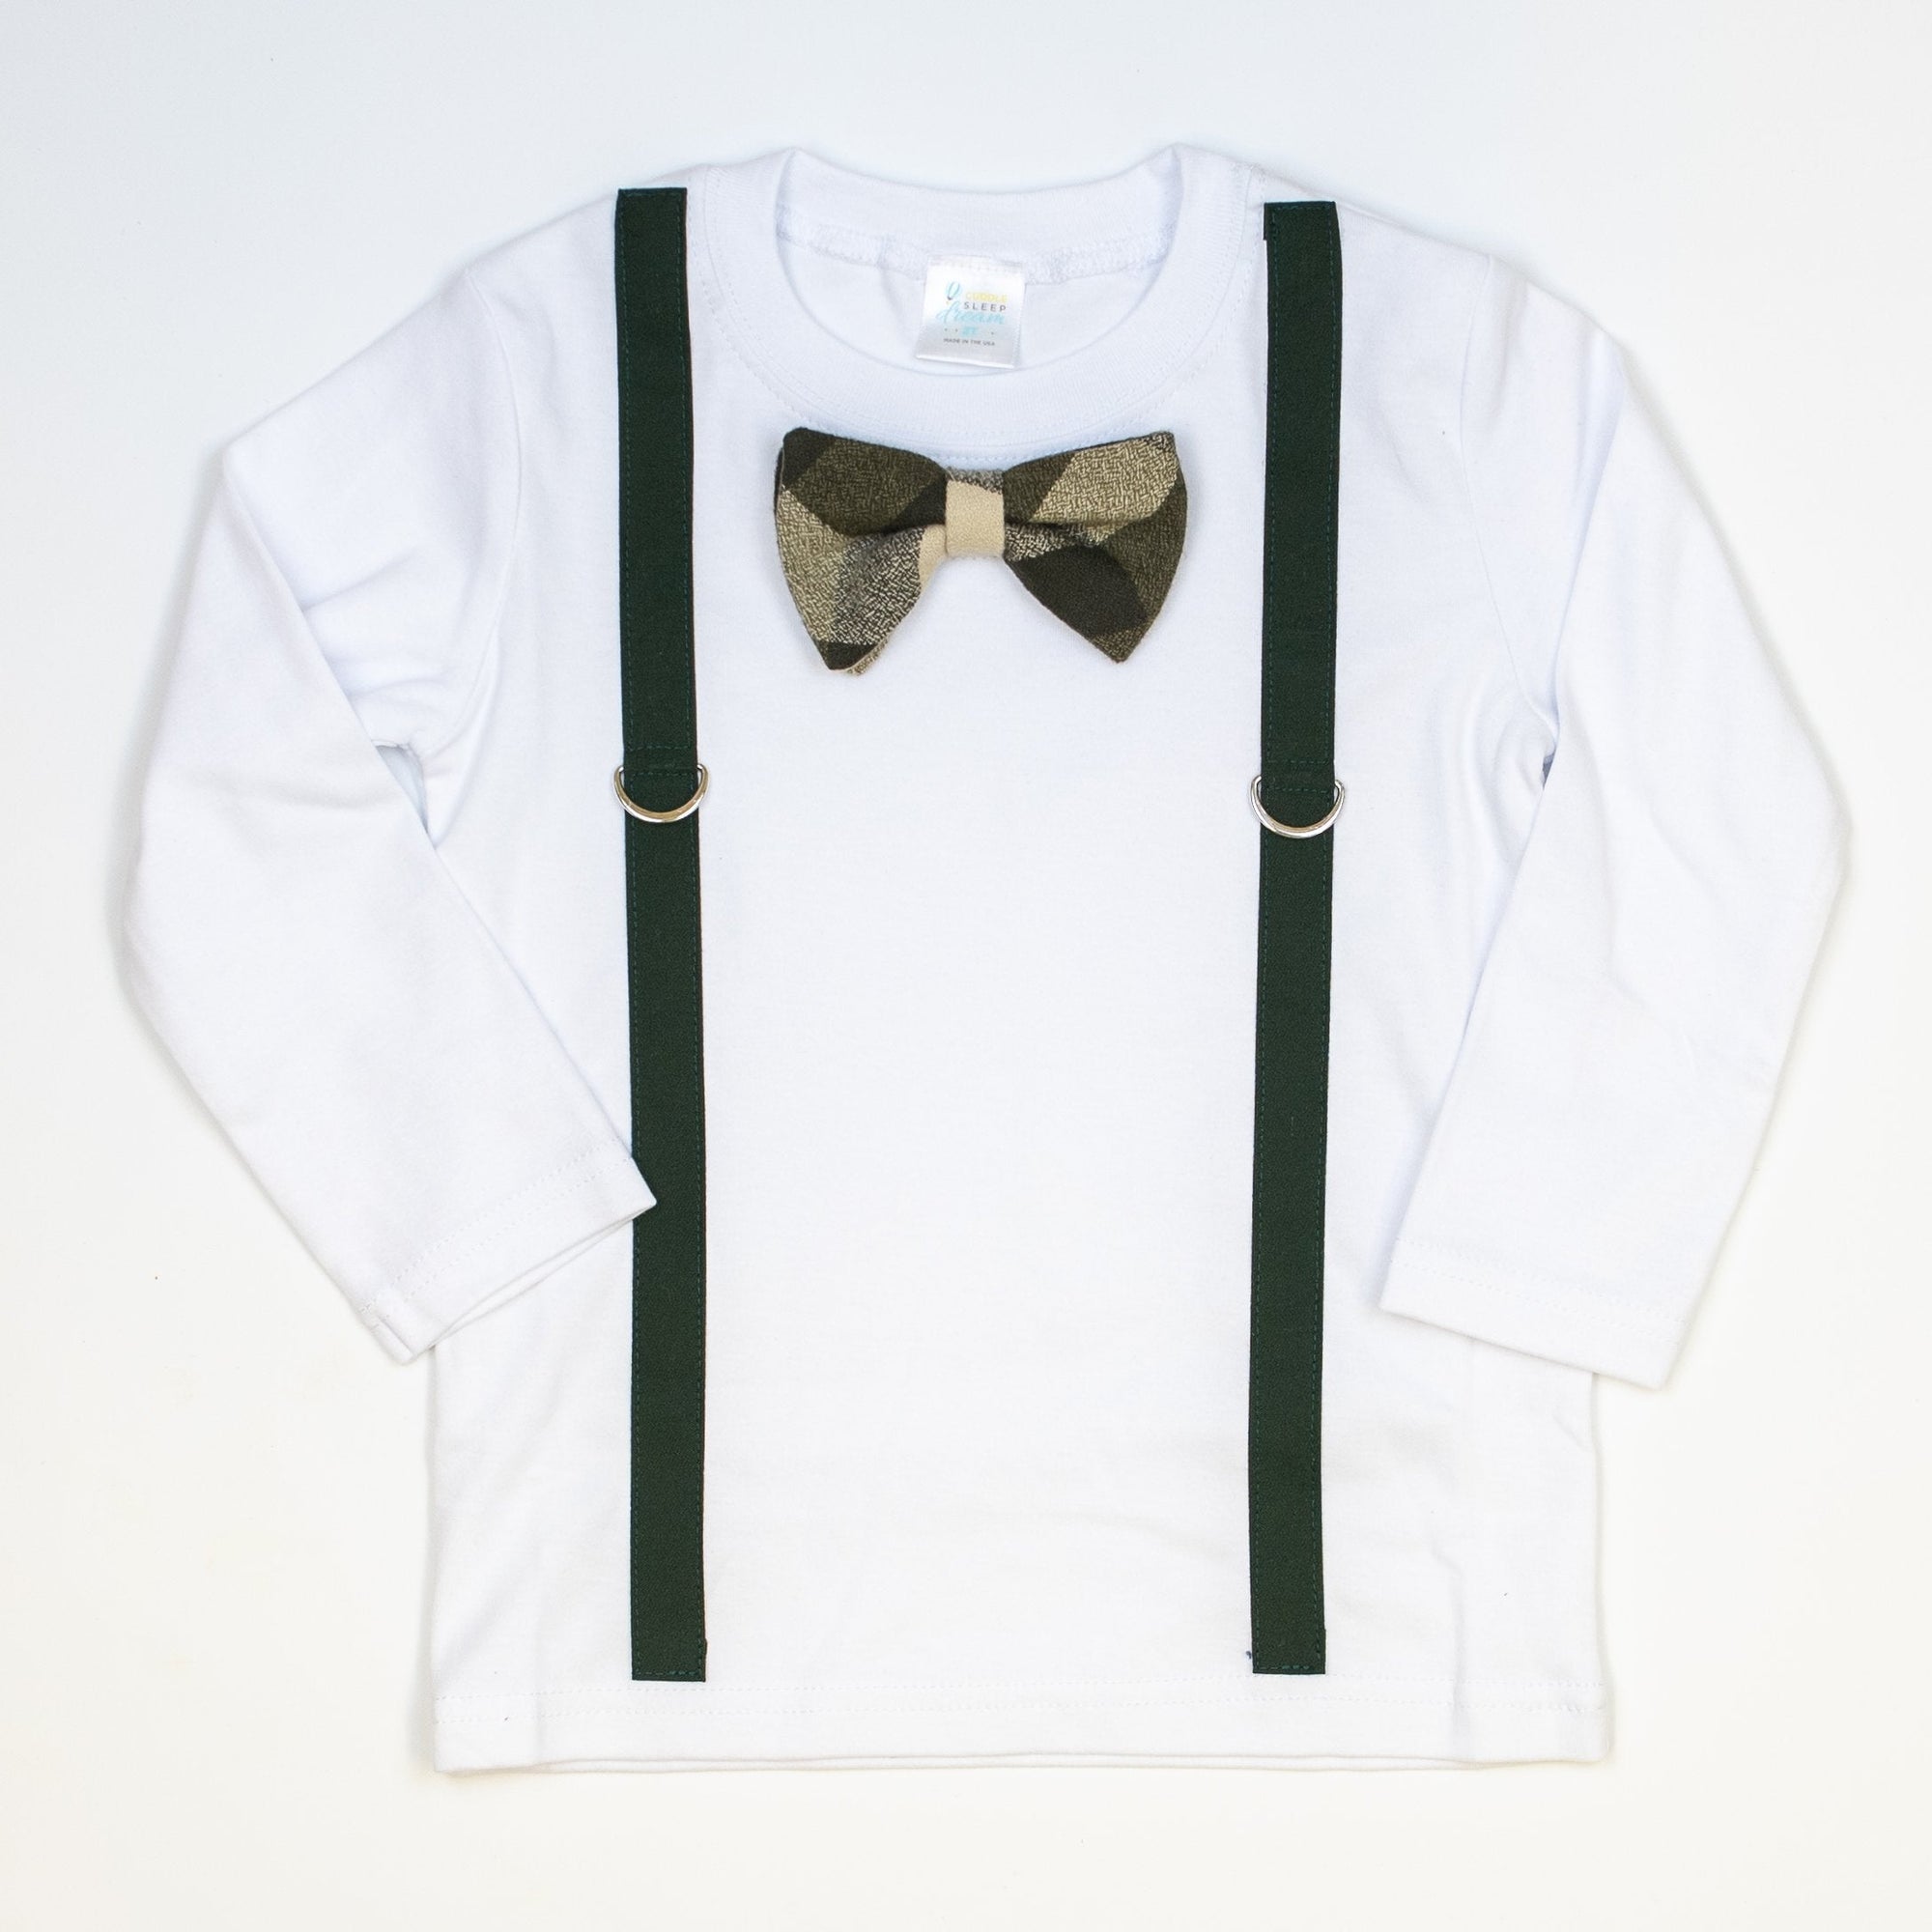 Cuddle Sleep Dream Oh Snap 2t Long Sleeve Tshirt Forest Suspender | Olive & Brown Plaid Bow Tie | Tshirt